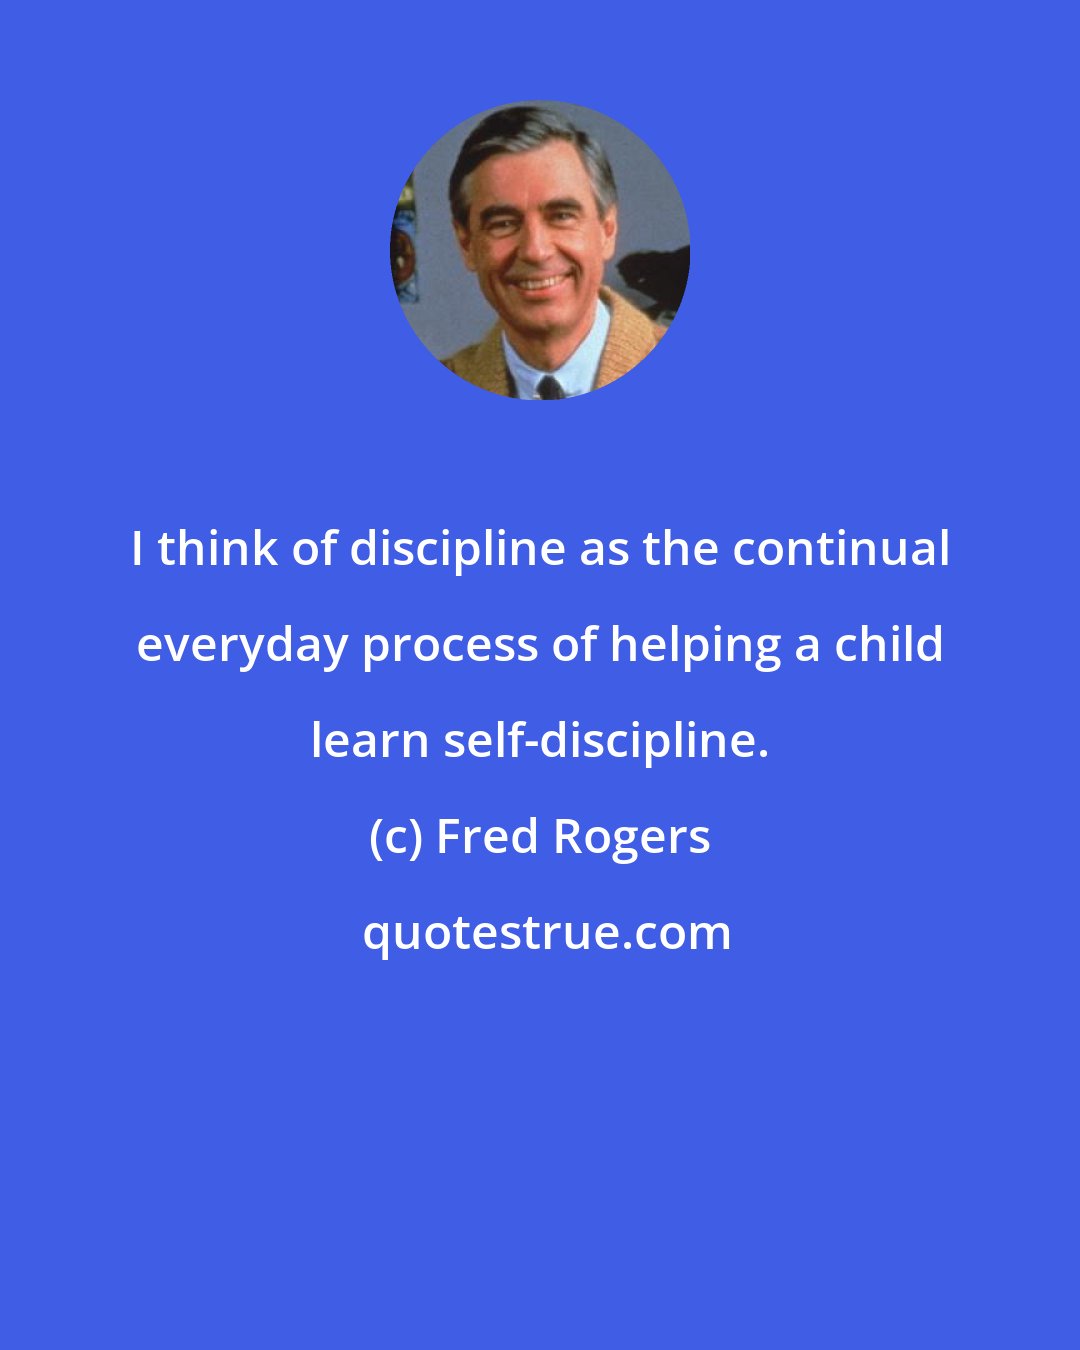 Fred Rogers: I think of discipline as the continual everyday process of helping a child learn self-discipline.